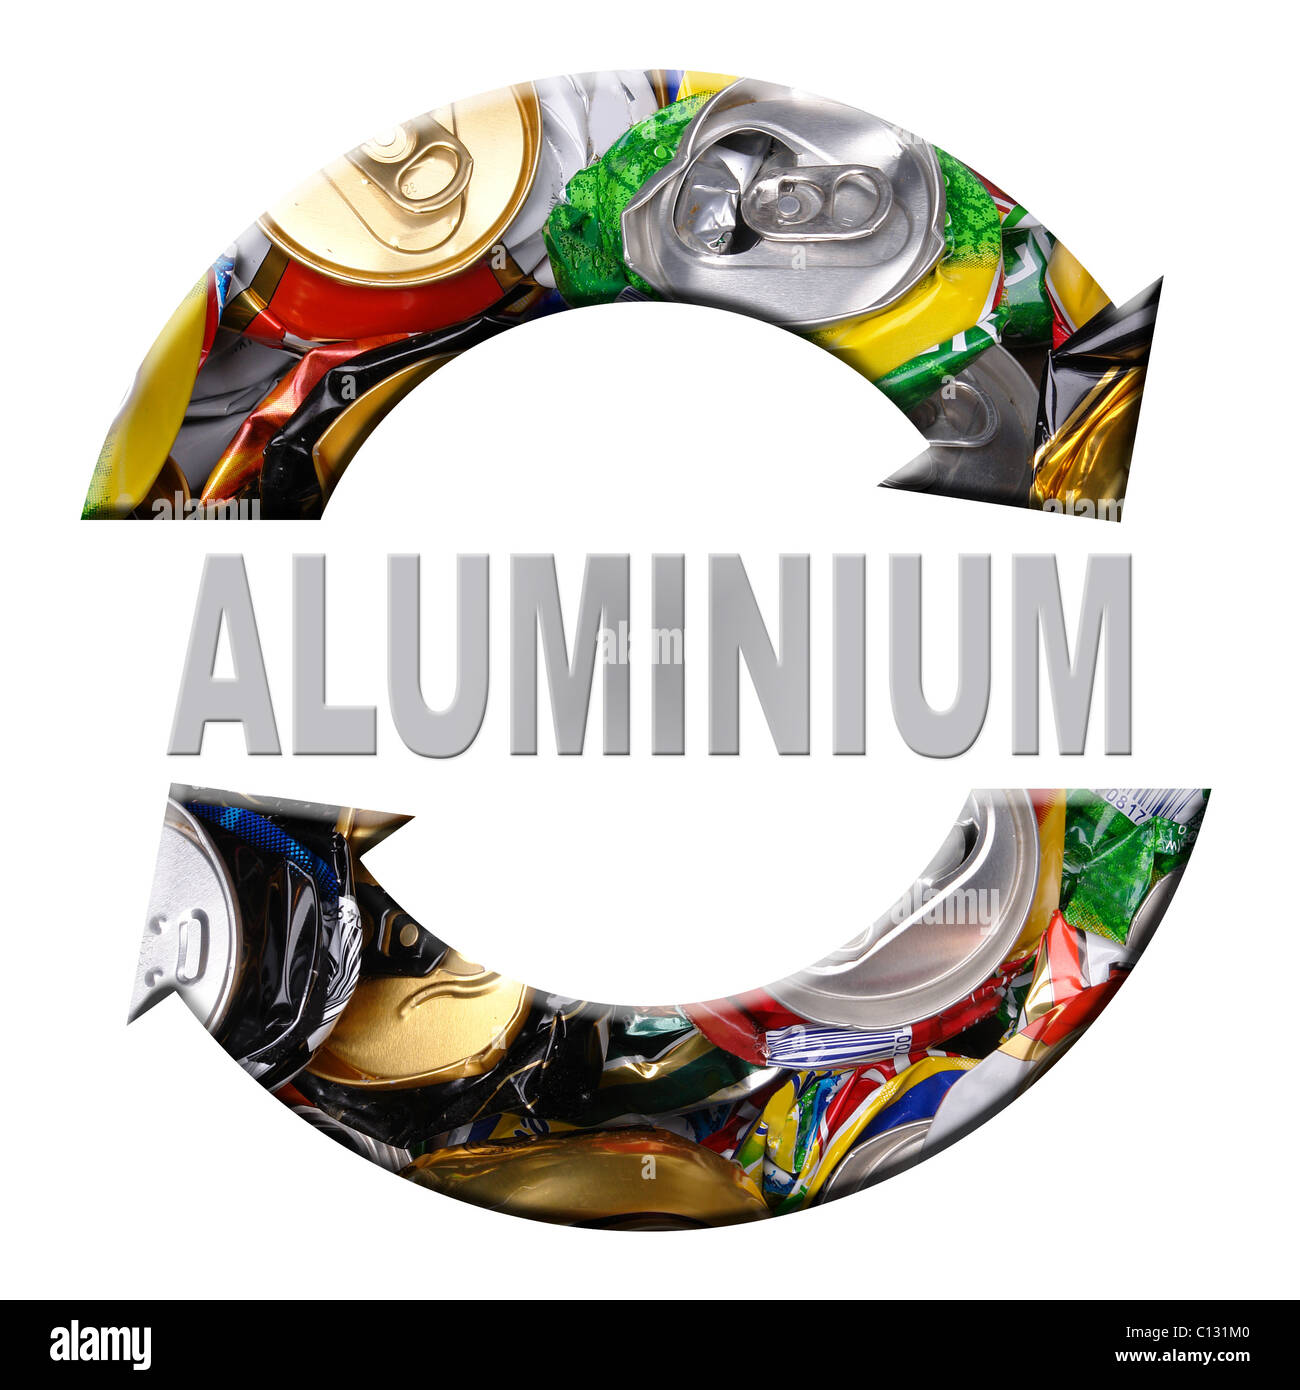 Two arrow aluminum recycling symbol with superimposed crashed beer cans over white background Stock Photo